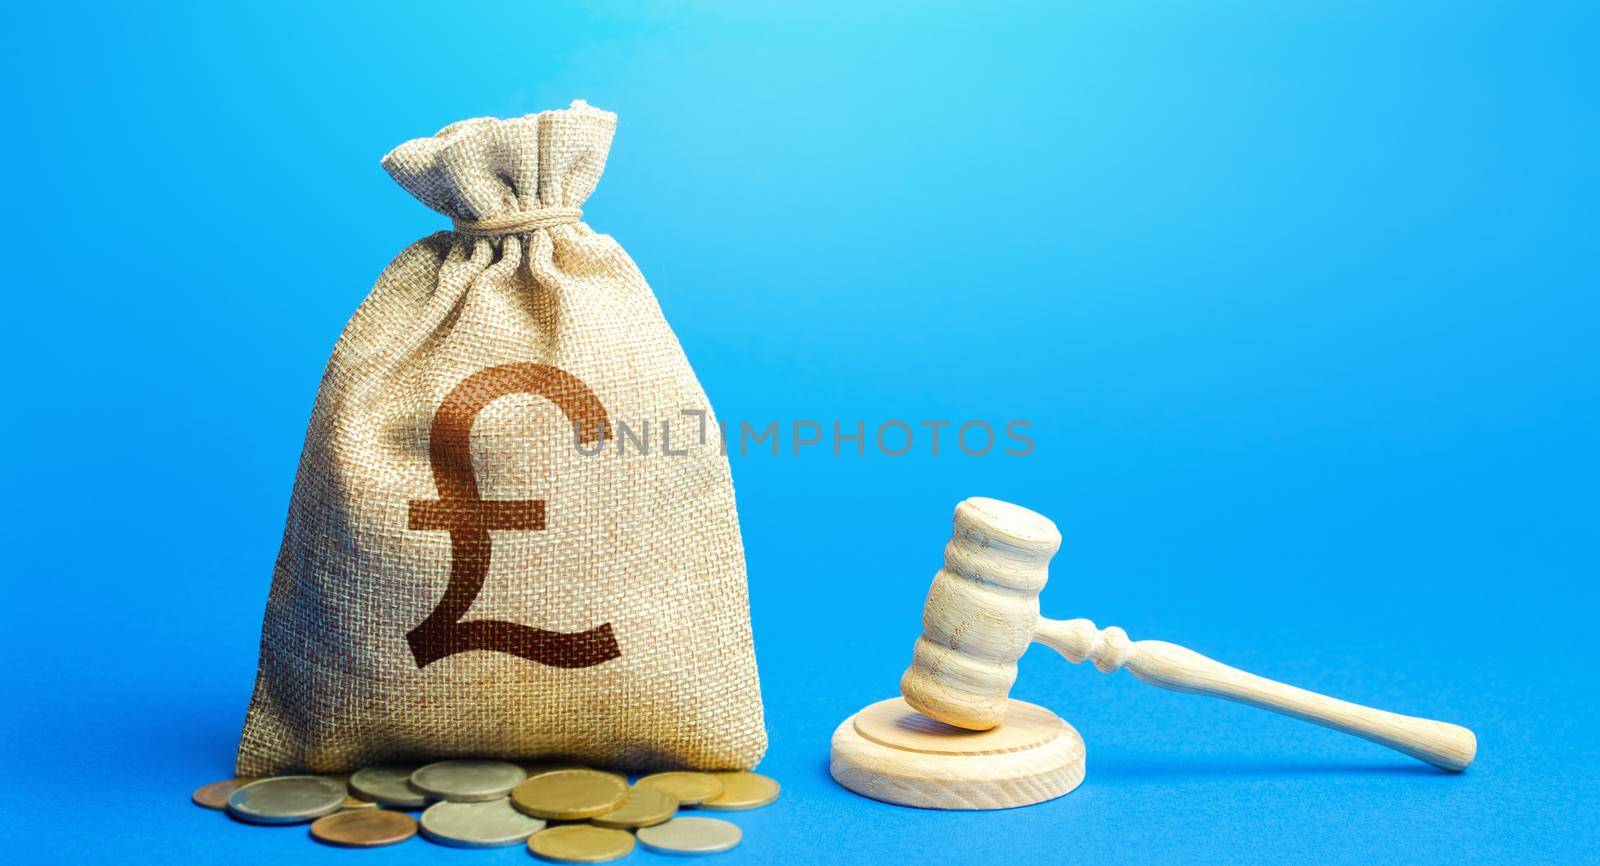 British pound sterling money bag and judge's gavel. Litigation, dispute resolution, conflict of interest settlement. Awarding moral financial compensation. Protection rights. Justice. Lawyer services.